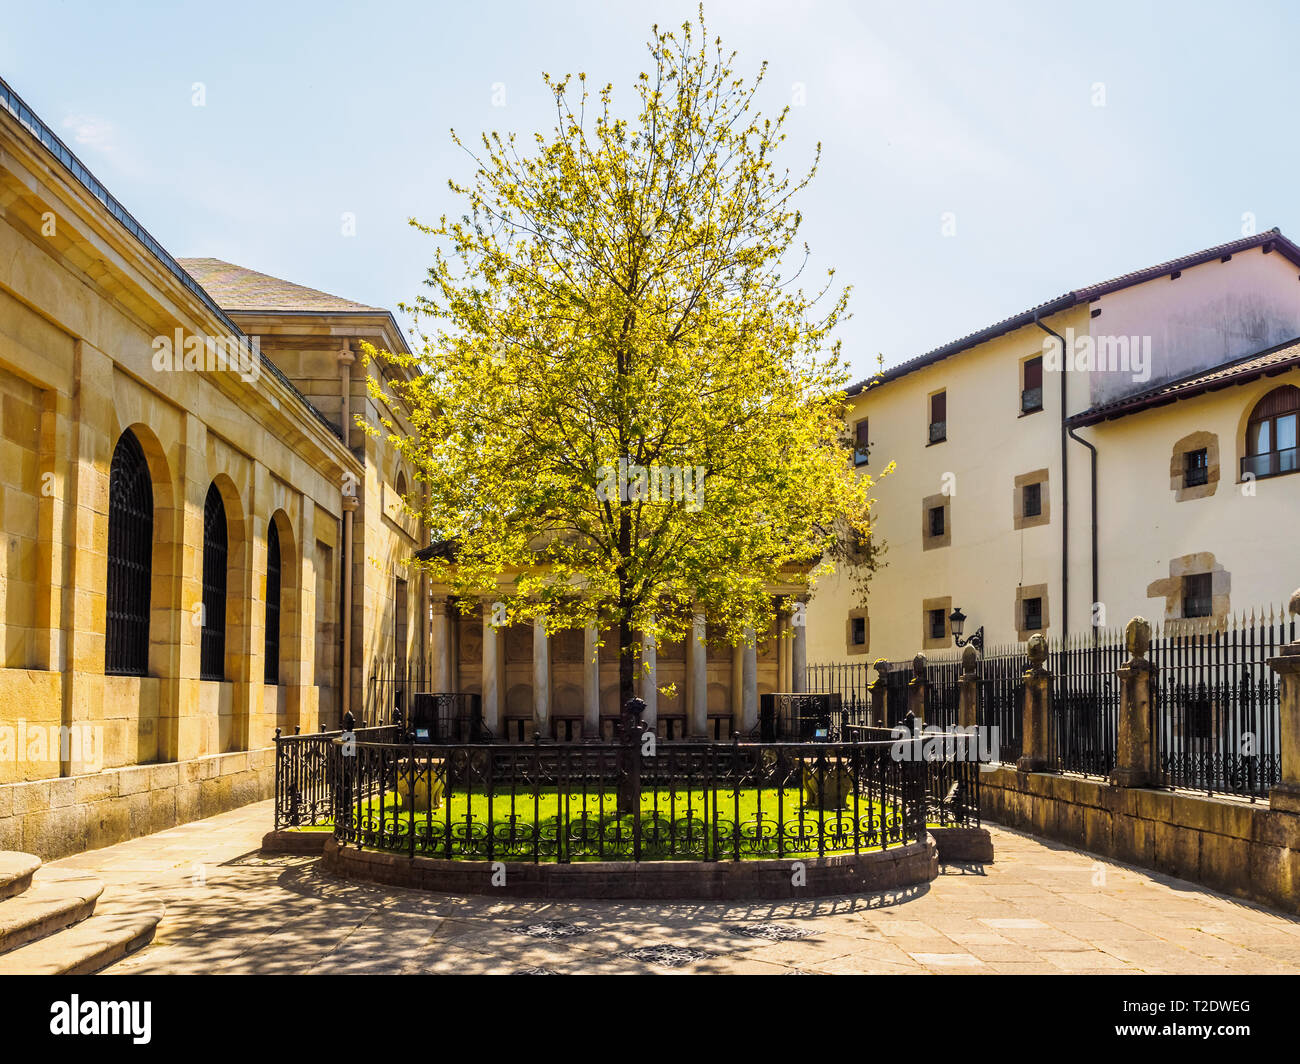 The Tree of Guernica (Gernika), Basque Country. Sunny day Stock Photo